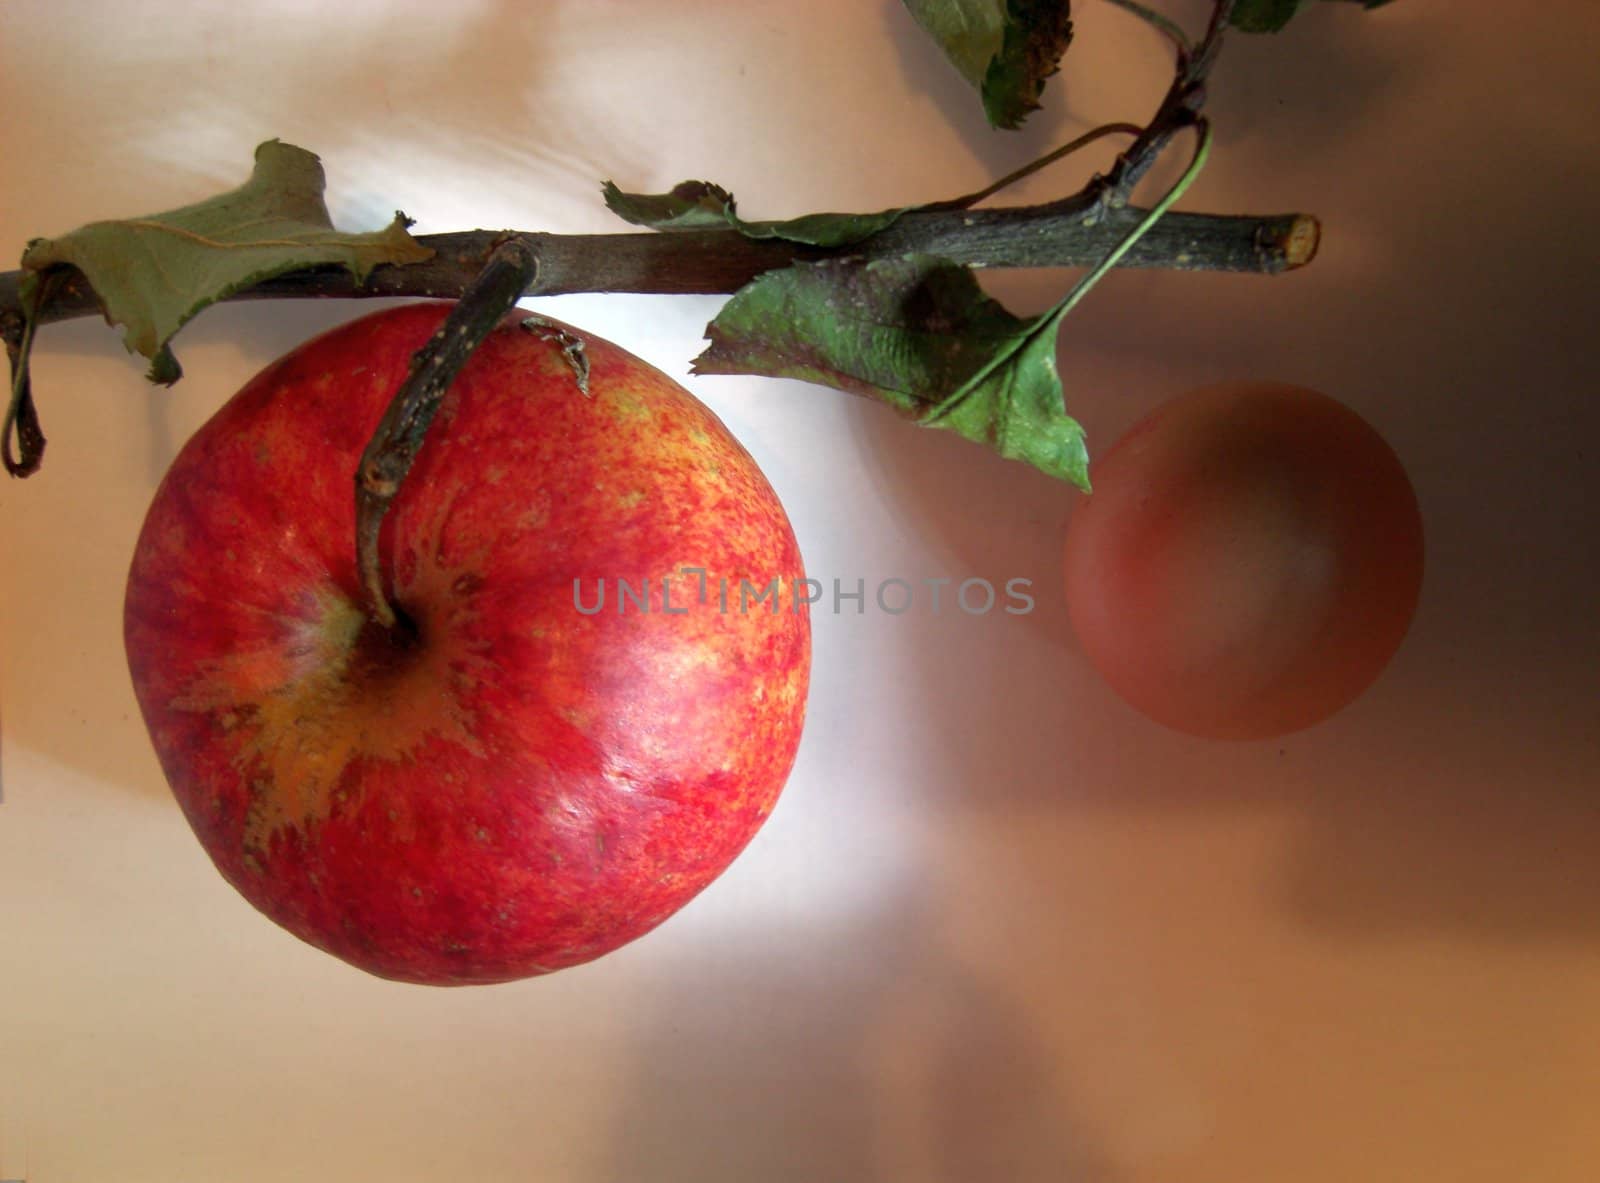 apple "malus domestica" on a twig with leaves. This kind of apple was cultured in 1880 and is named after the Hessian baron Freiherr von Berlepsch. It is also known as red or golden renette.